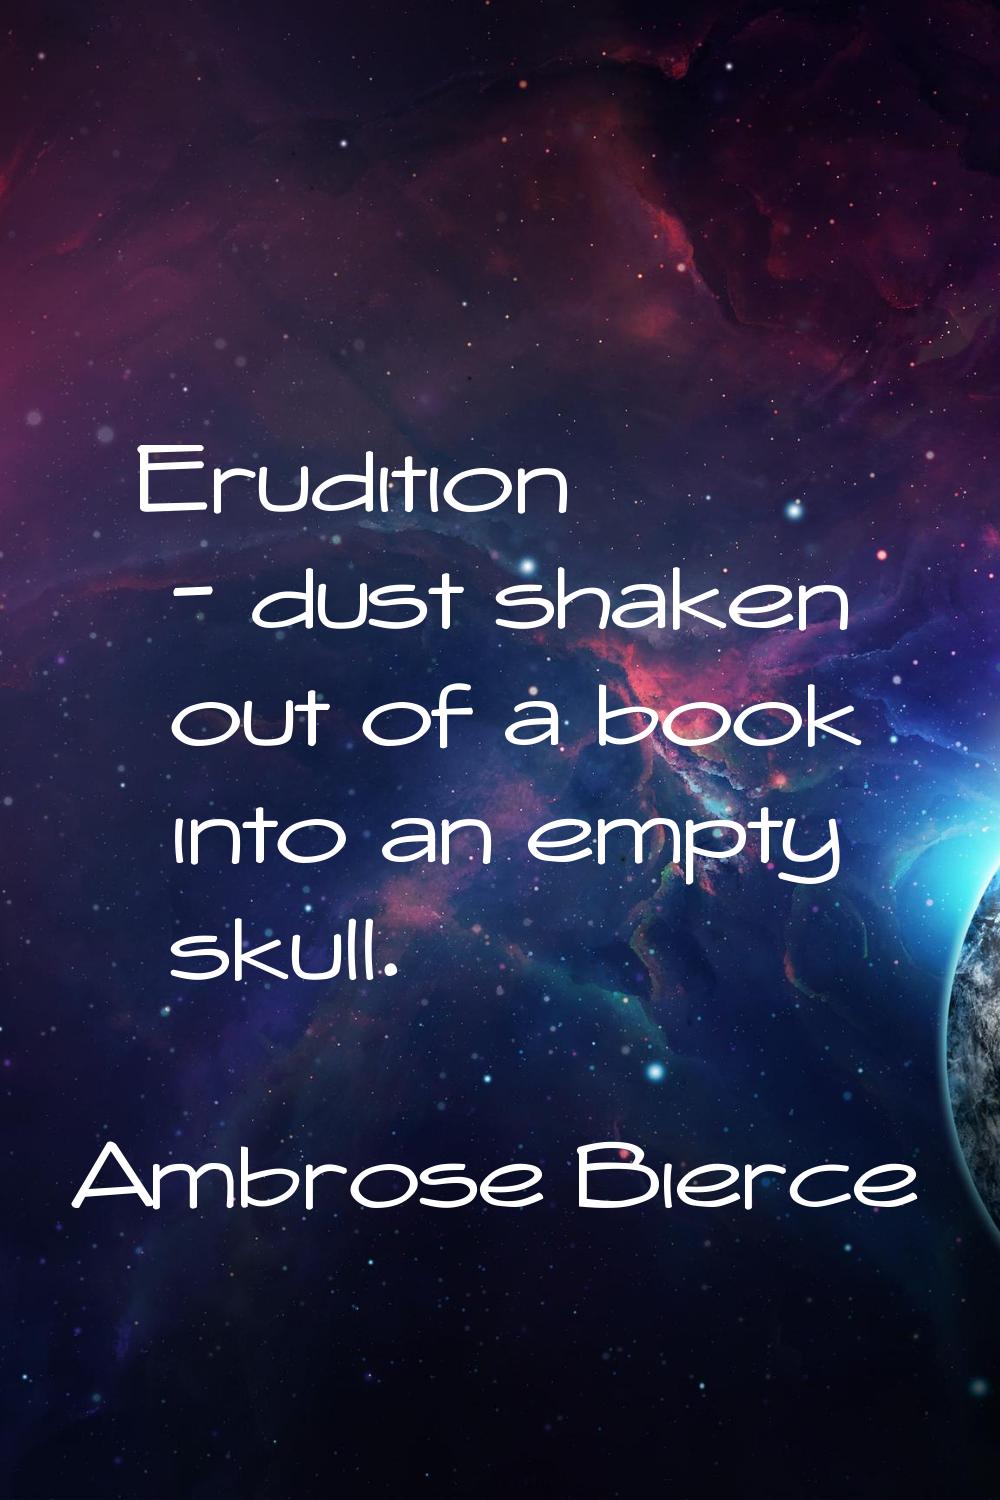 Erudition - dust shaken out of a book into an empty skull.